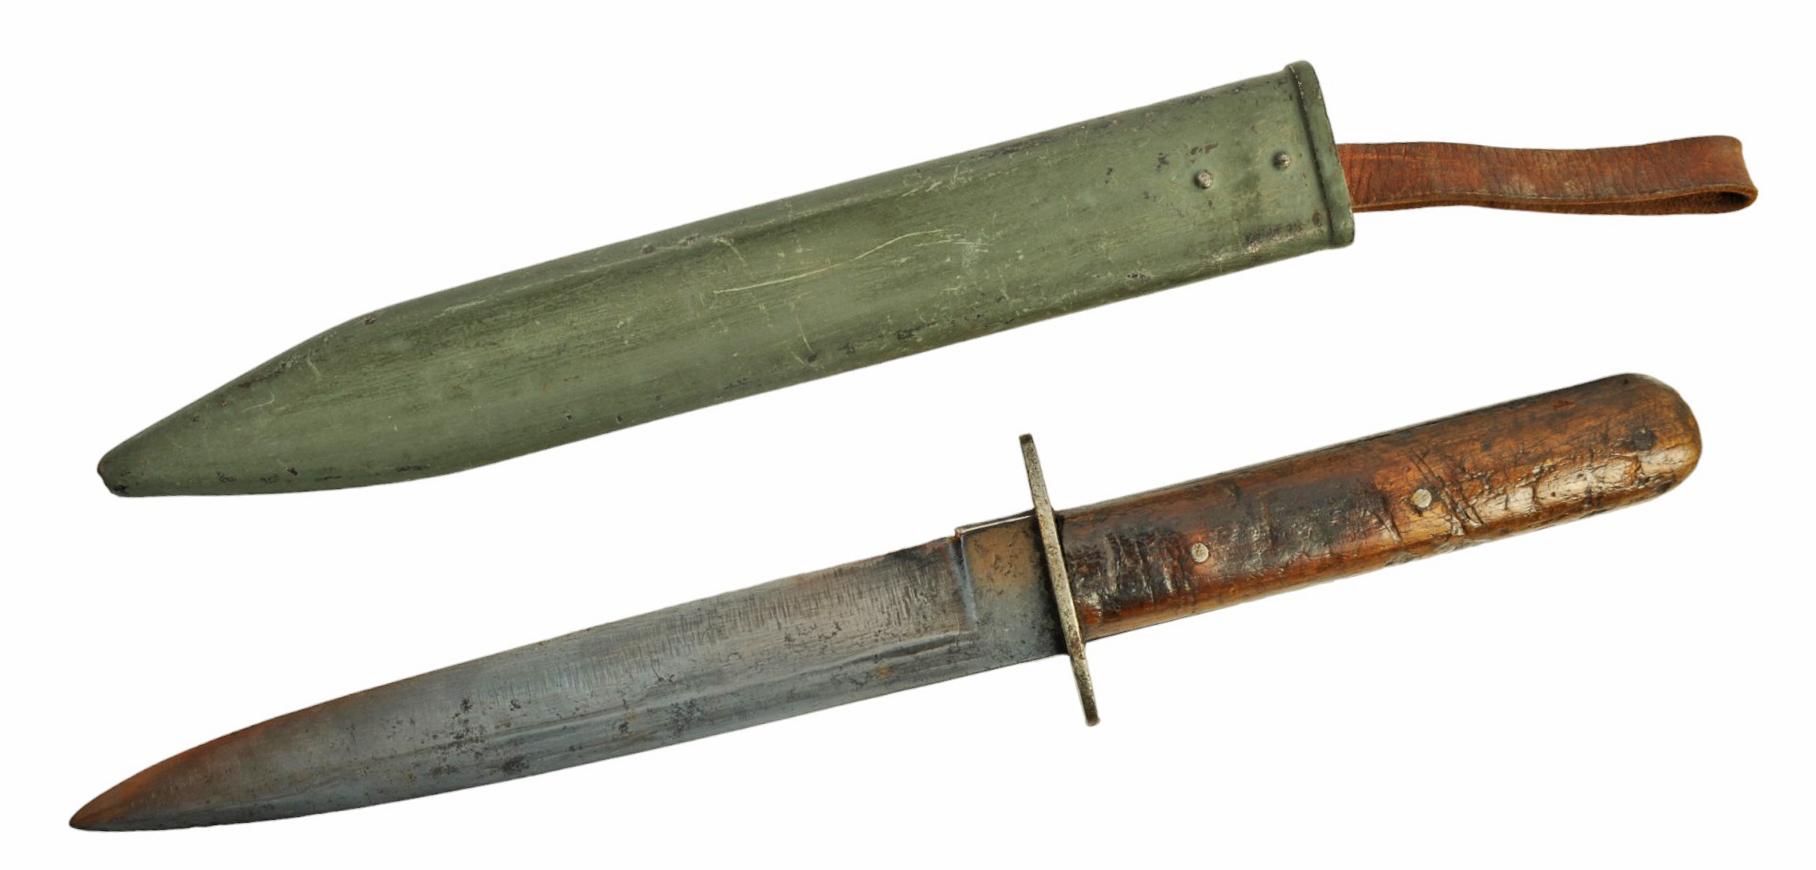 Austro-Hungarian Military WWI M1917 Trench Knife (AH)